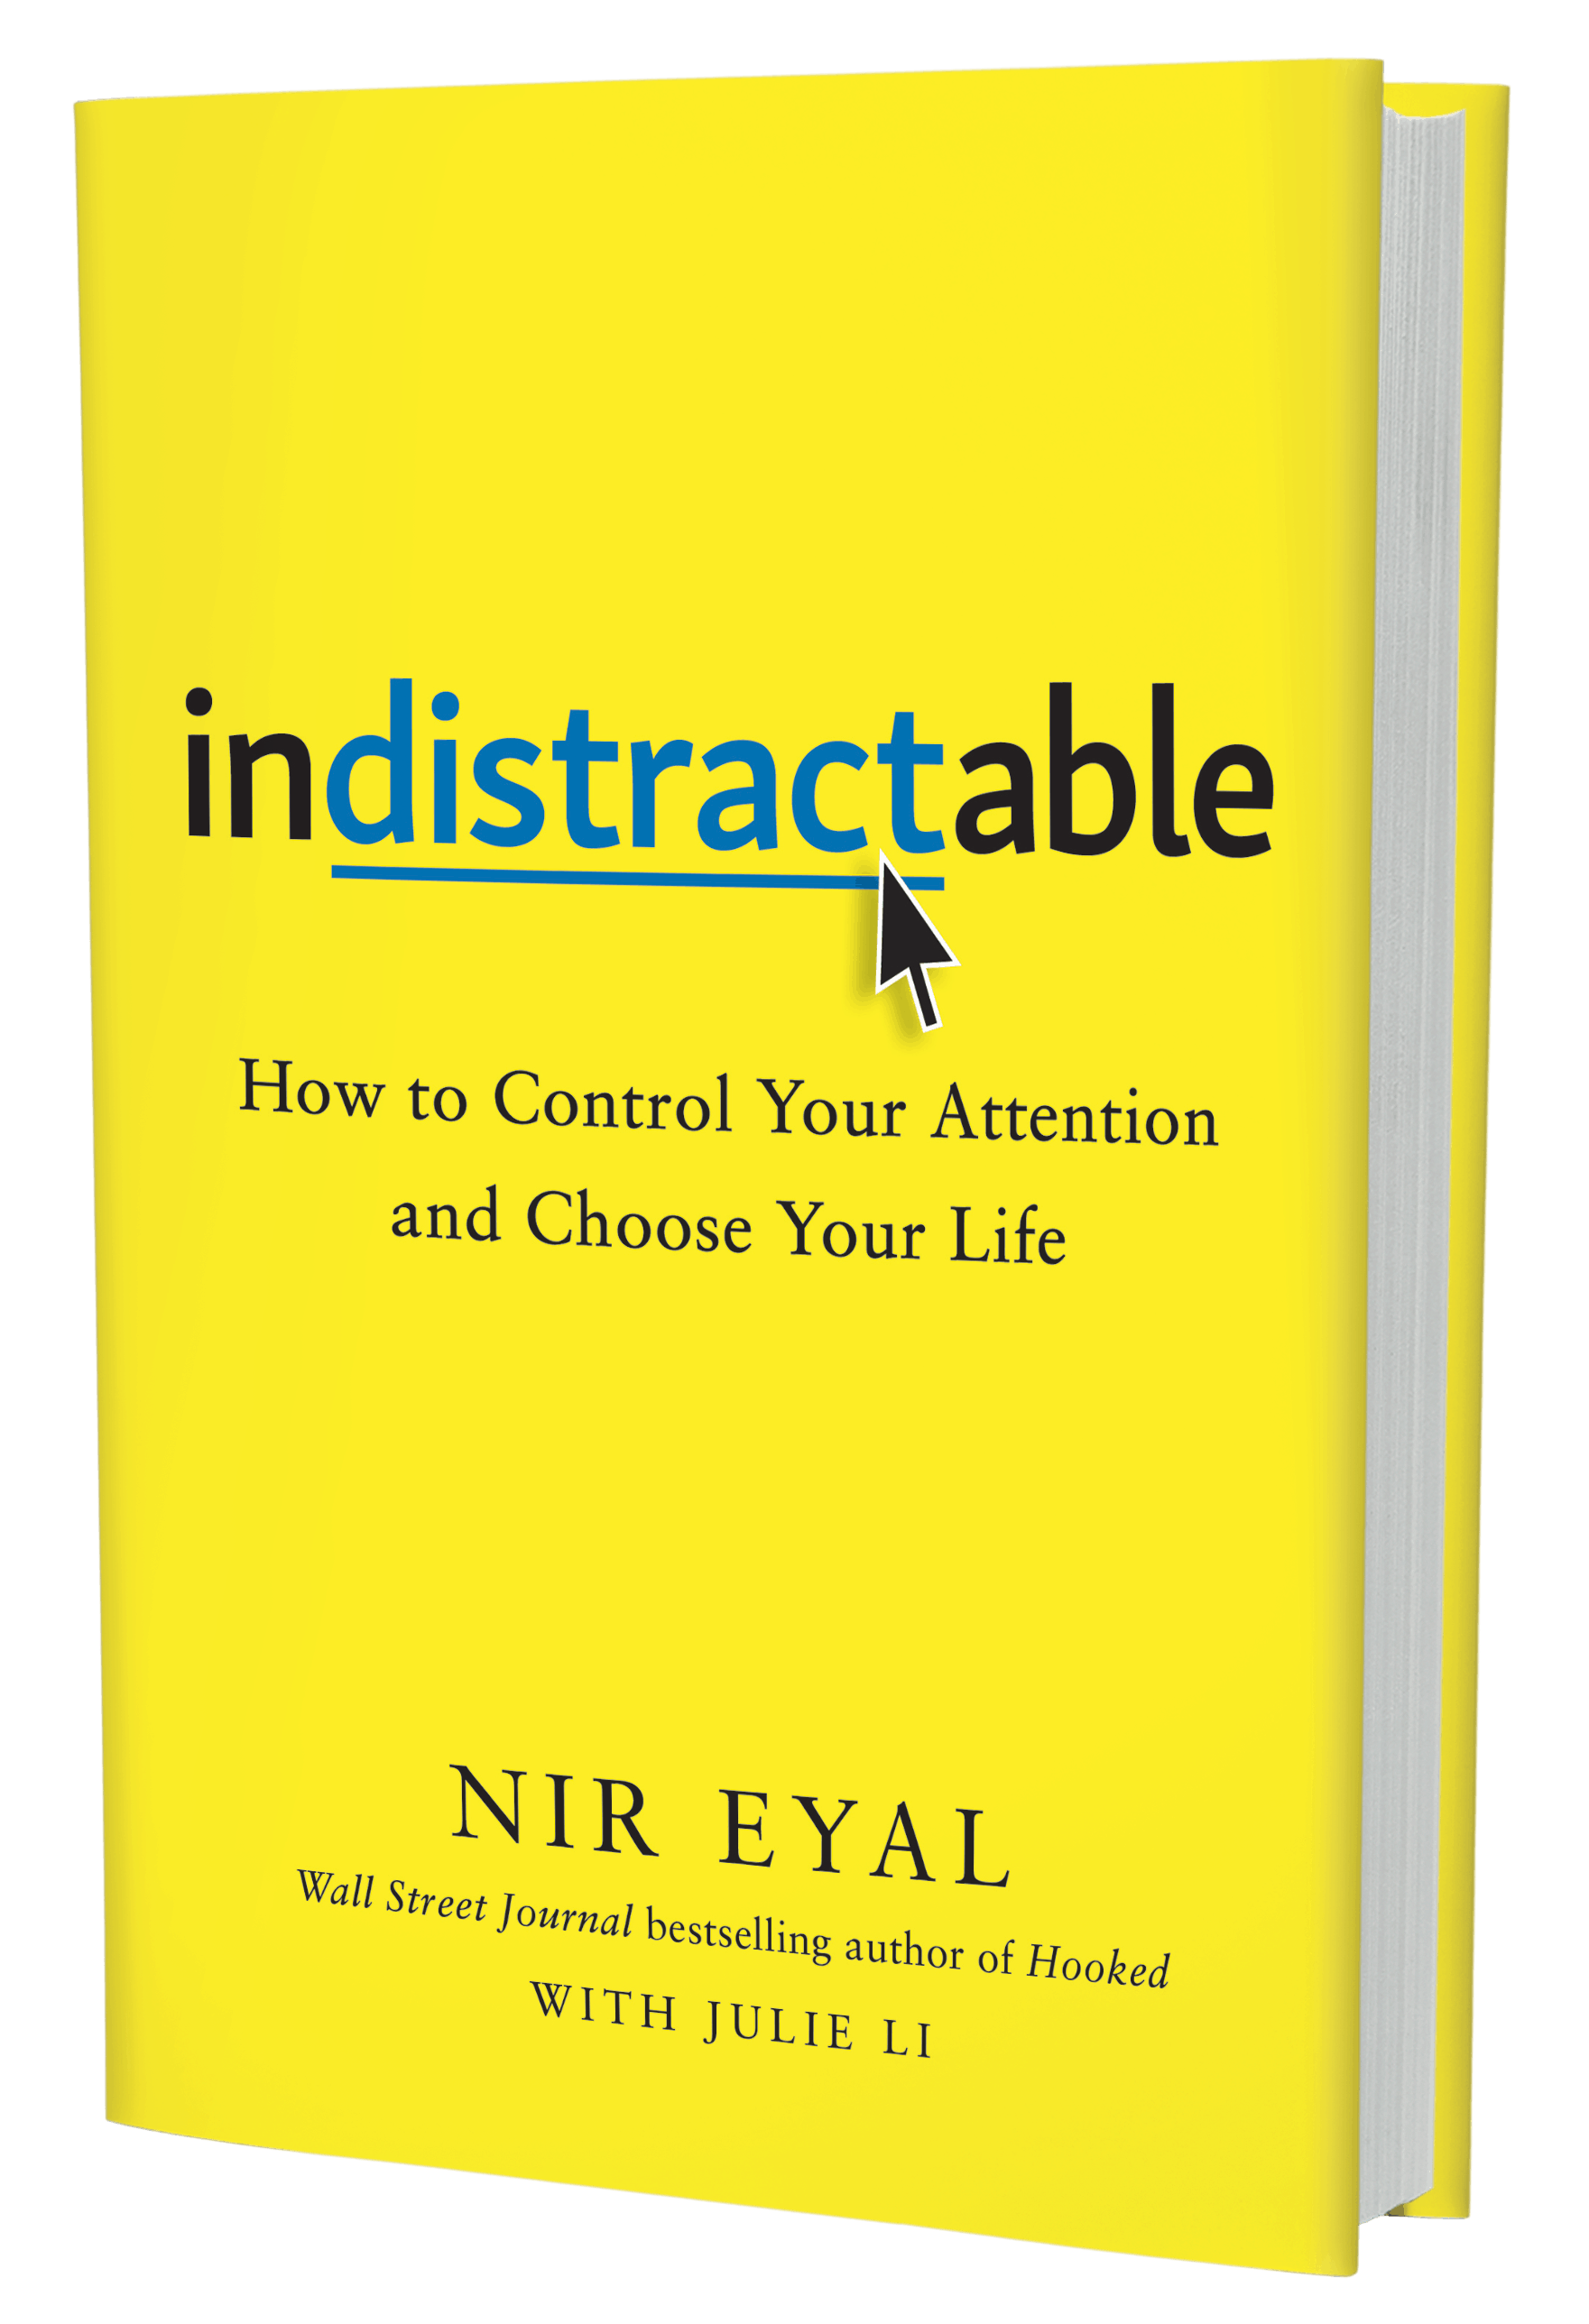 https://www.nirandfar.com/wp-content/uploads/2019/05/Indistractable-Control-Your-Attention-Choose-Your-Life-Nir-Eyal-3D-cover.png